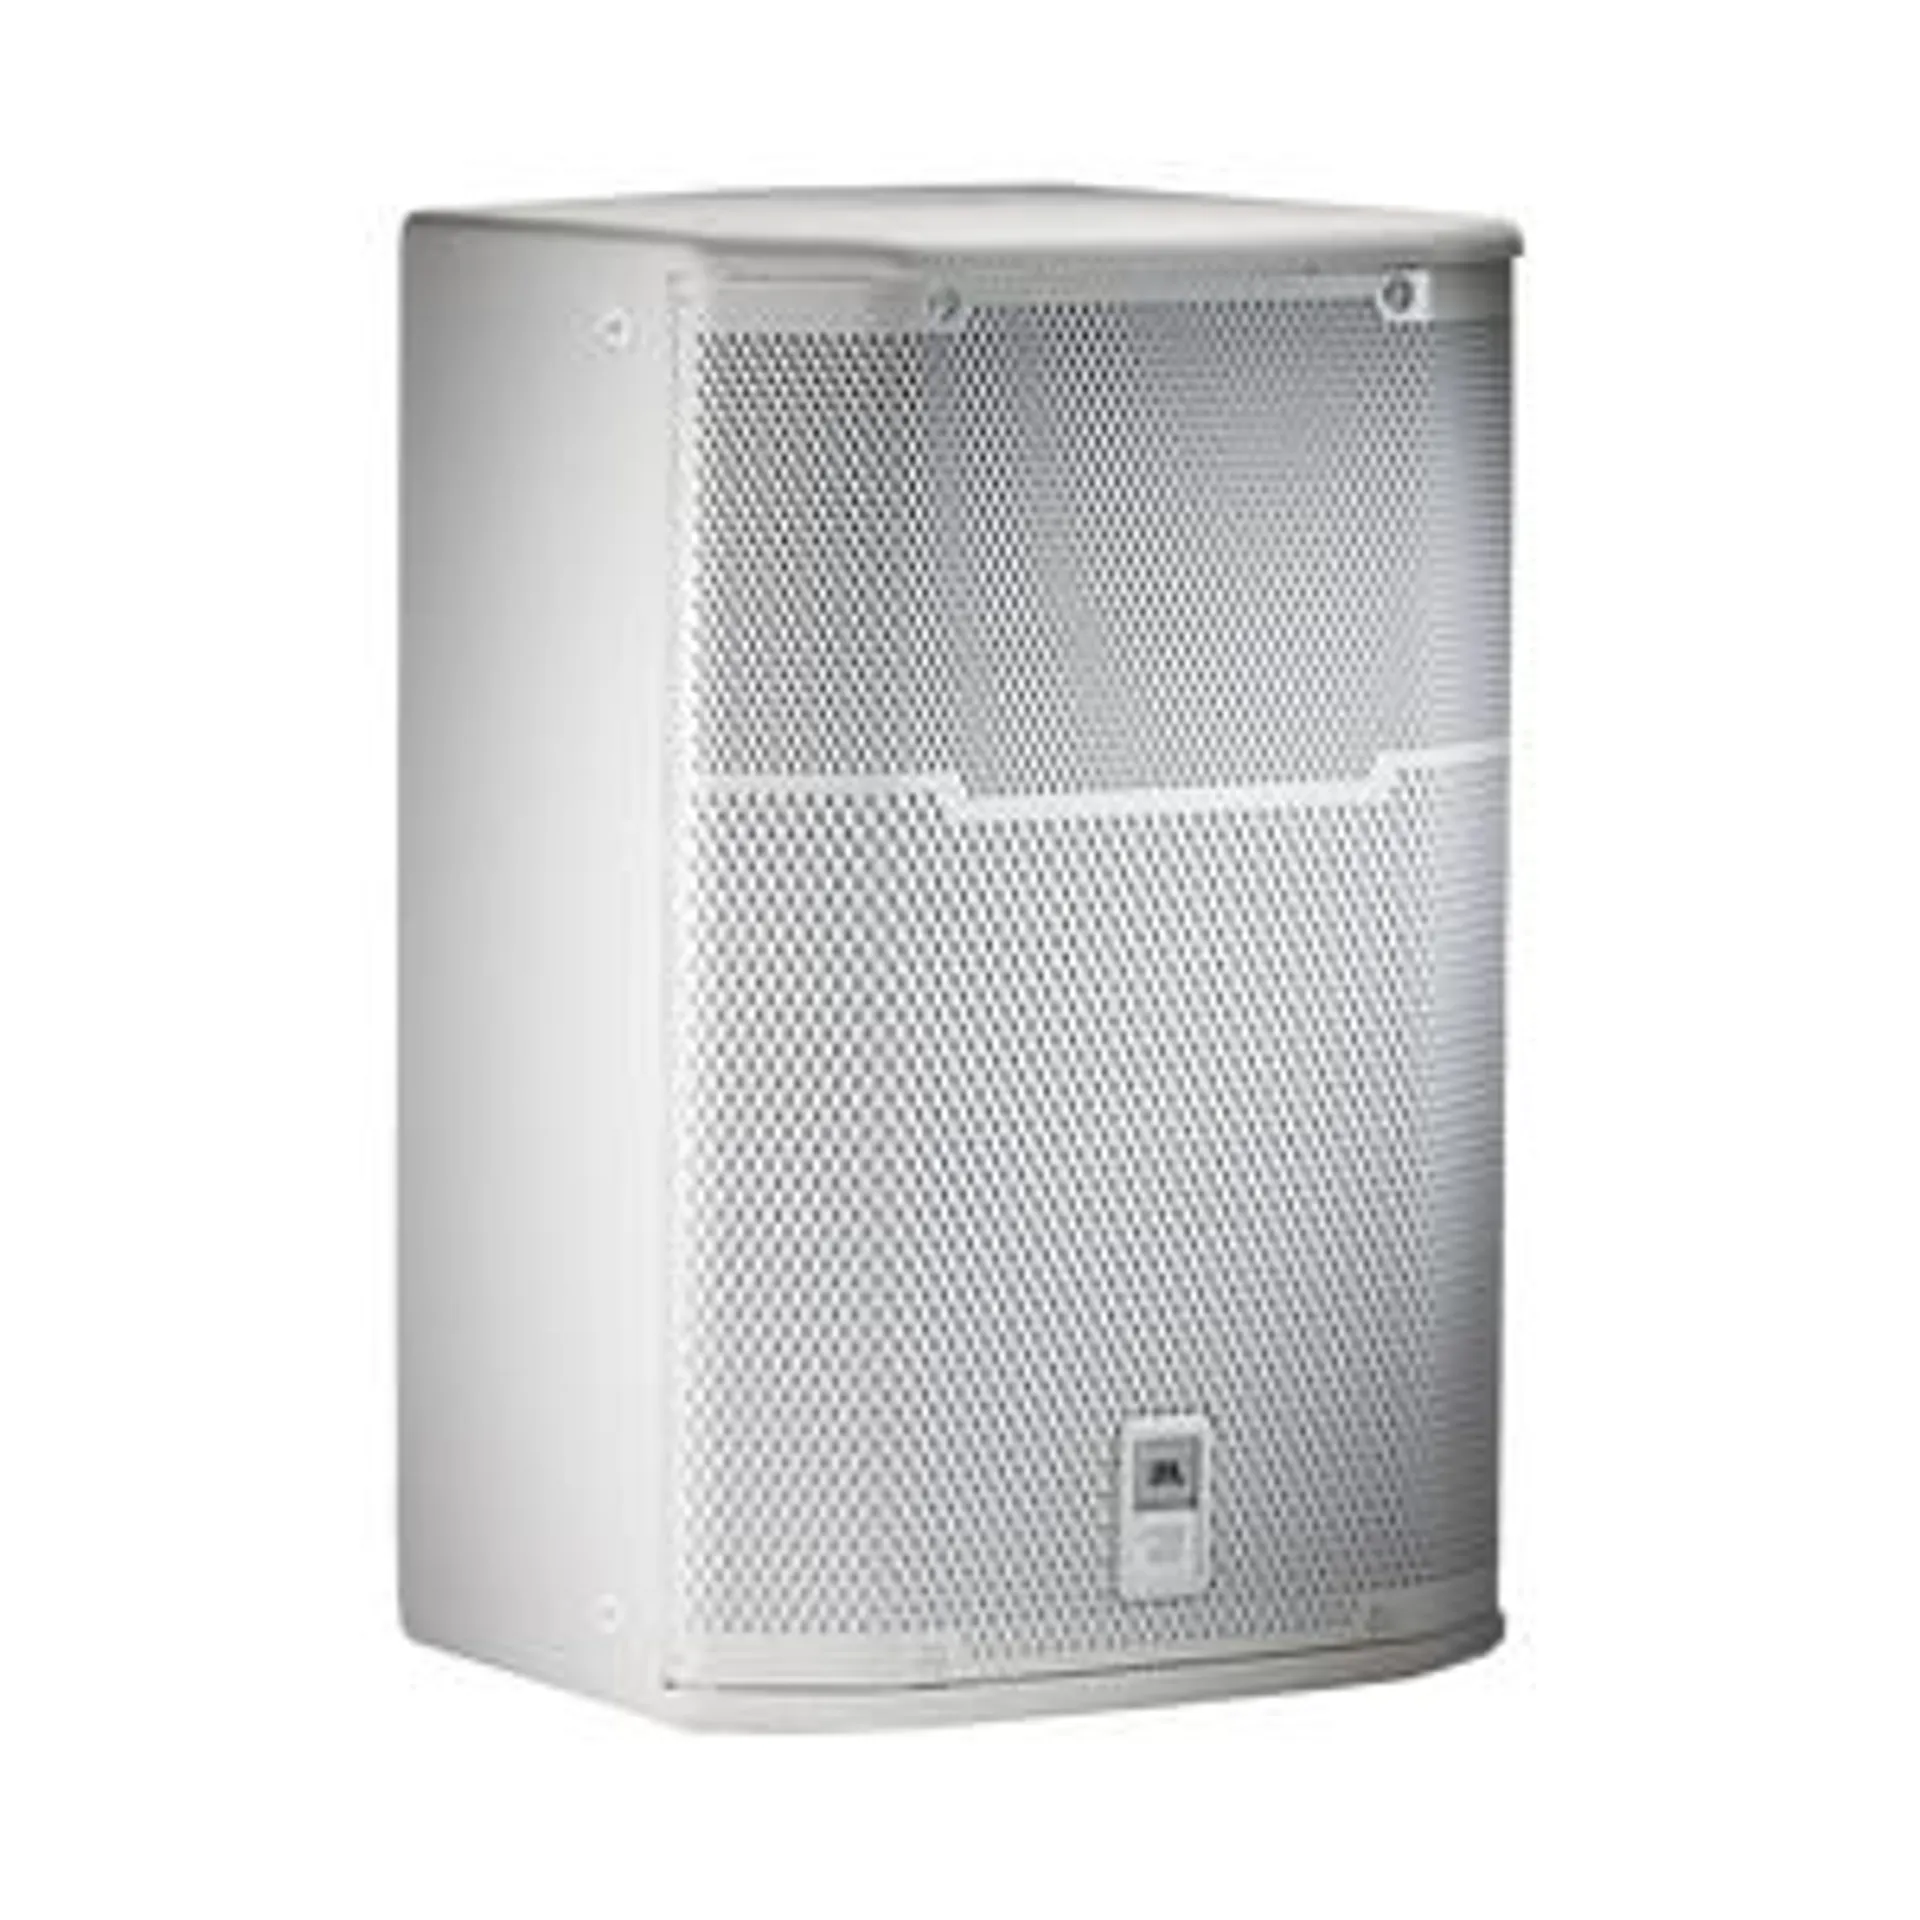 /passive-pa-speakers/PRX415M-WH-.html?dwvar_PRX415M-WH-_color=White-GLOBAL-Current&cgid=passive-pa-speakers